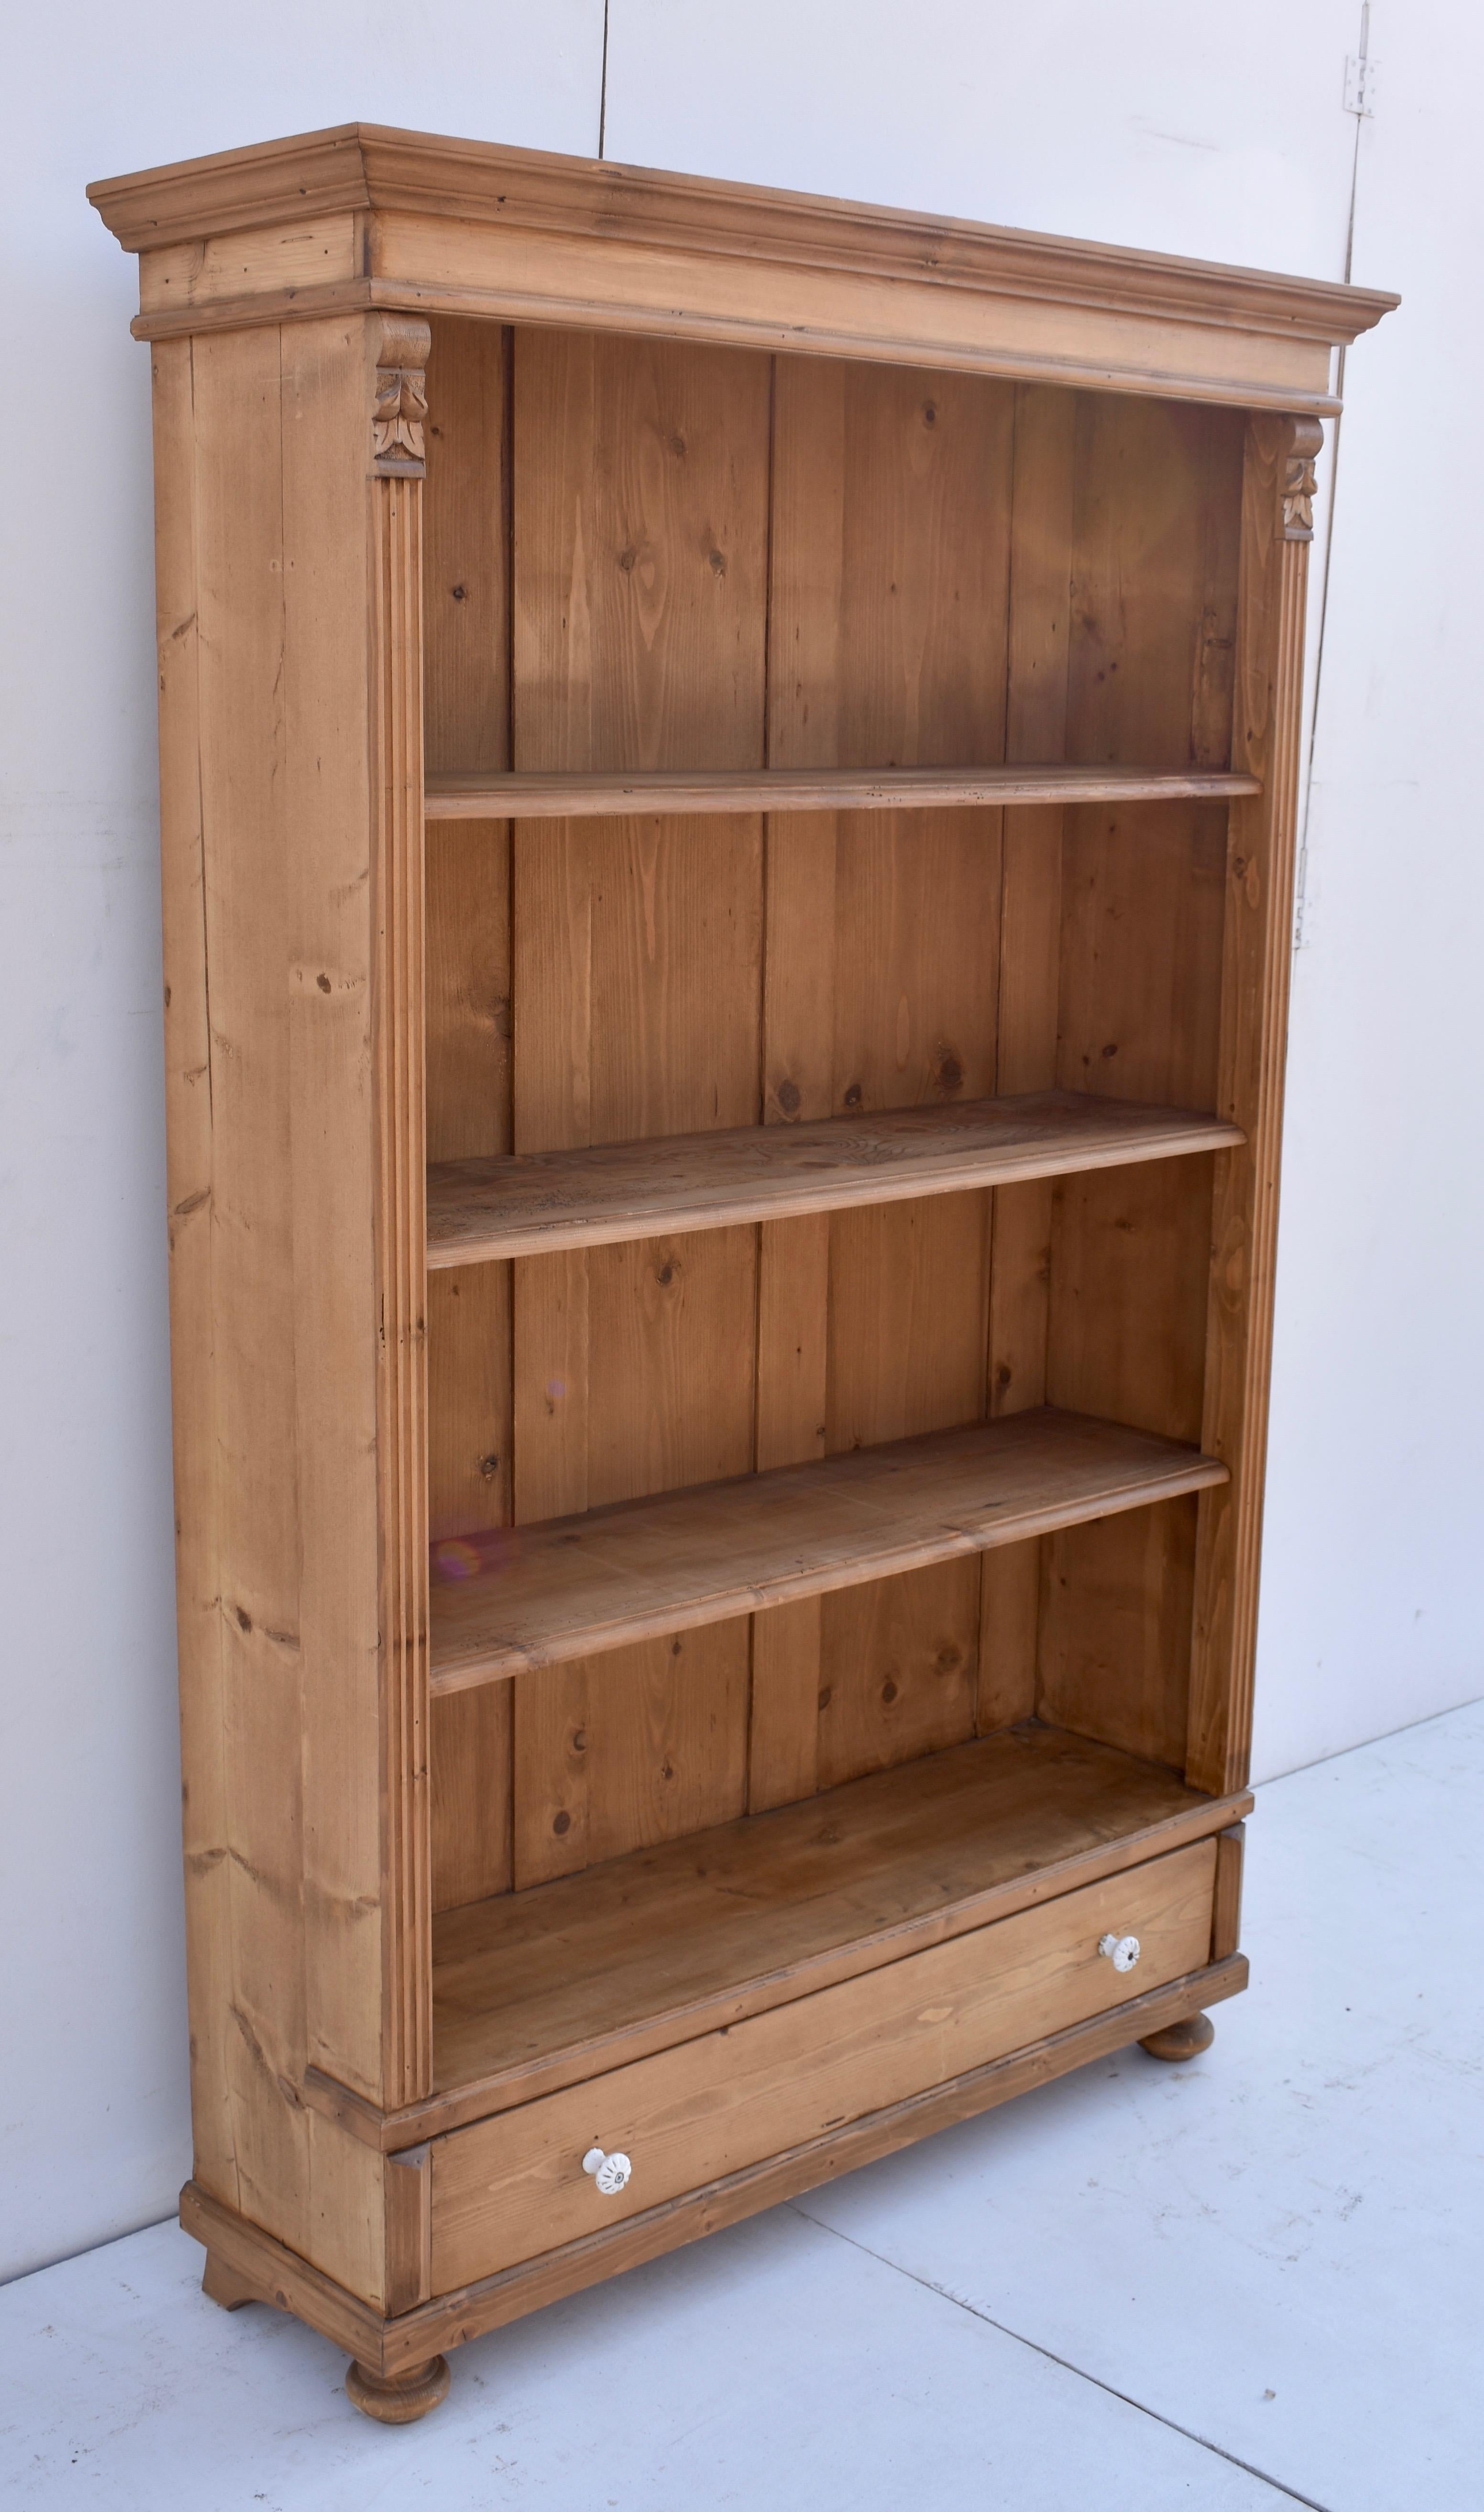 Antique pine bookcases are hard to find so the shell of this piece was provided by a vintage pine armoire which had suffered some damage or perhaps lost a door. With one board width removed from the sides and the original backboards and crown